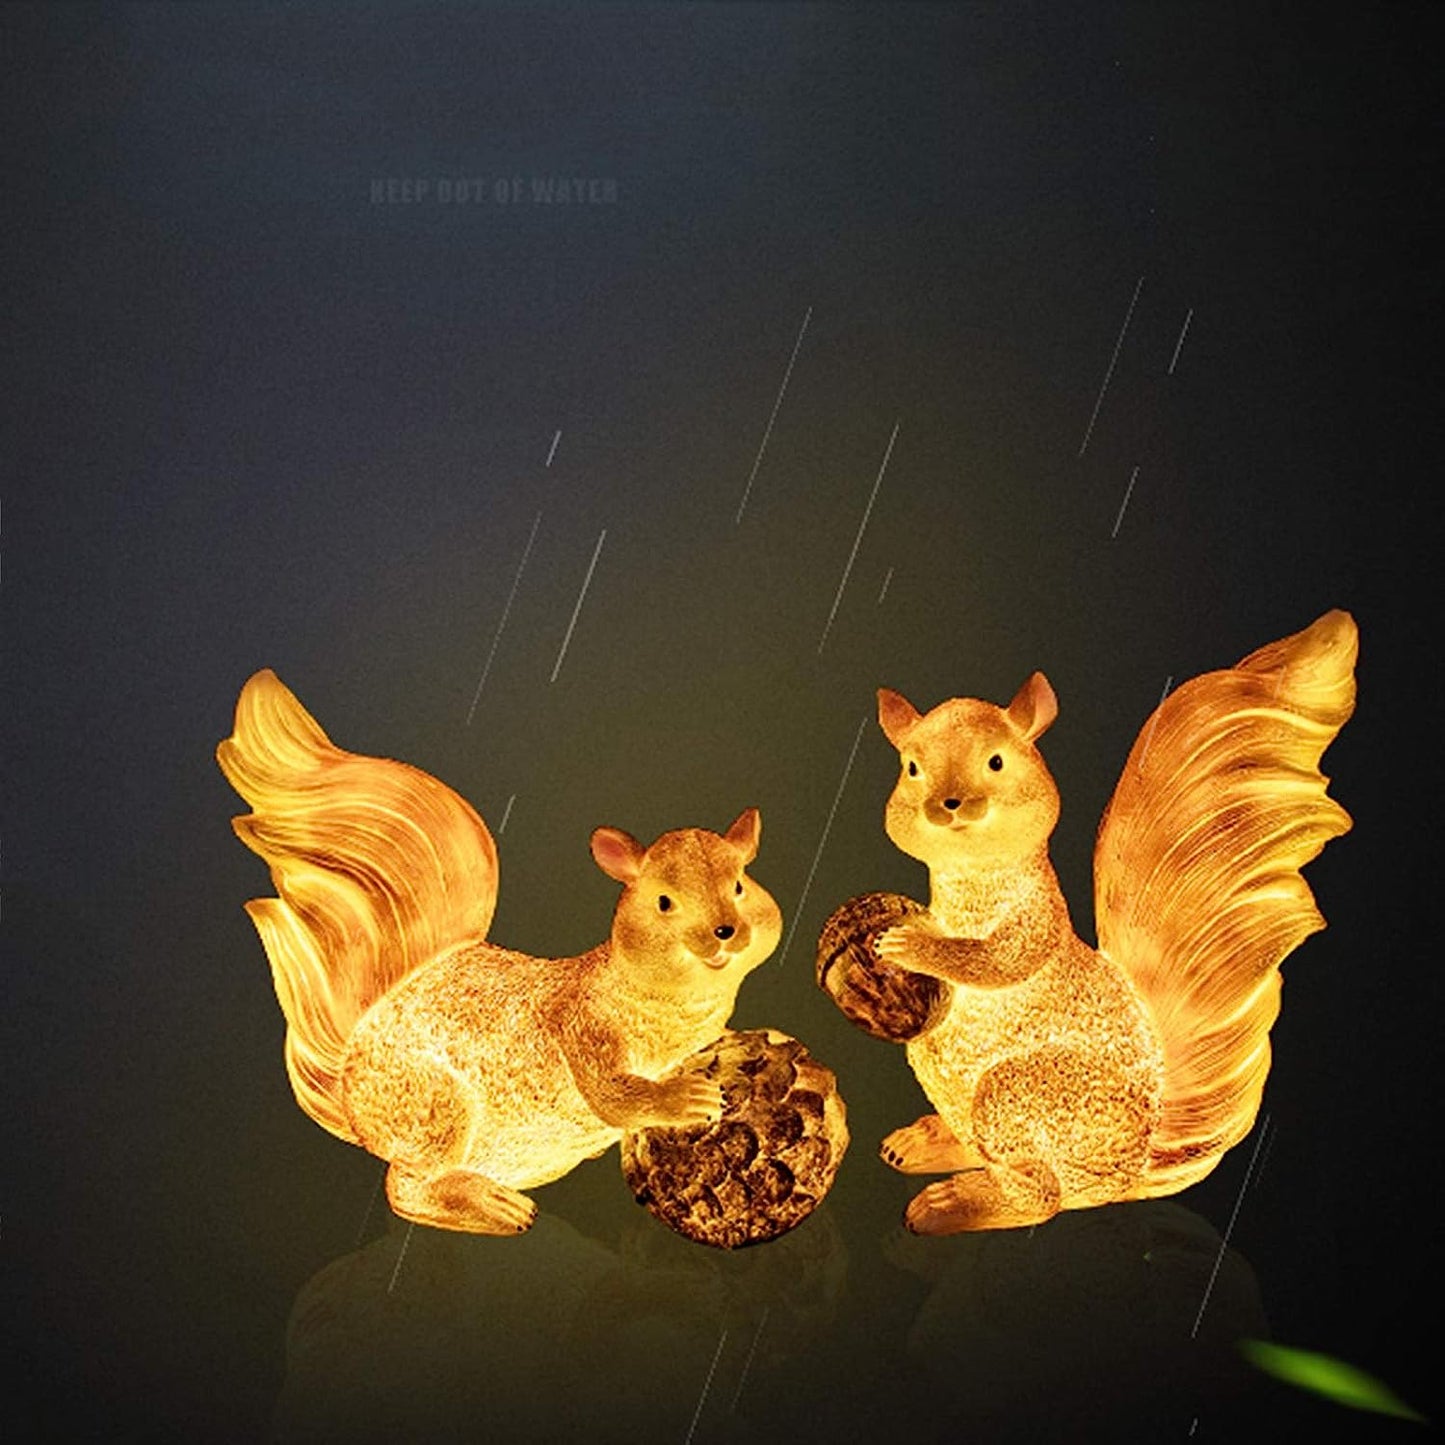 Load image into Gallery viewer, Unique Design Cute Mini Squirrel Animal Miniature Decoration Led Light by Gloss (9262)
